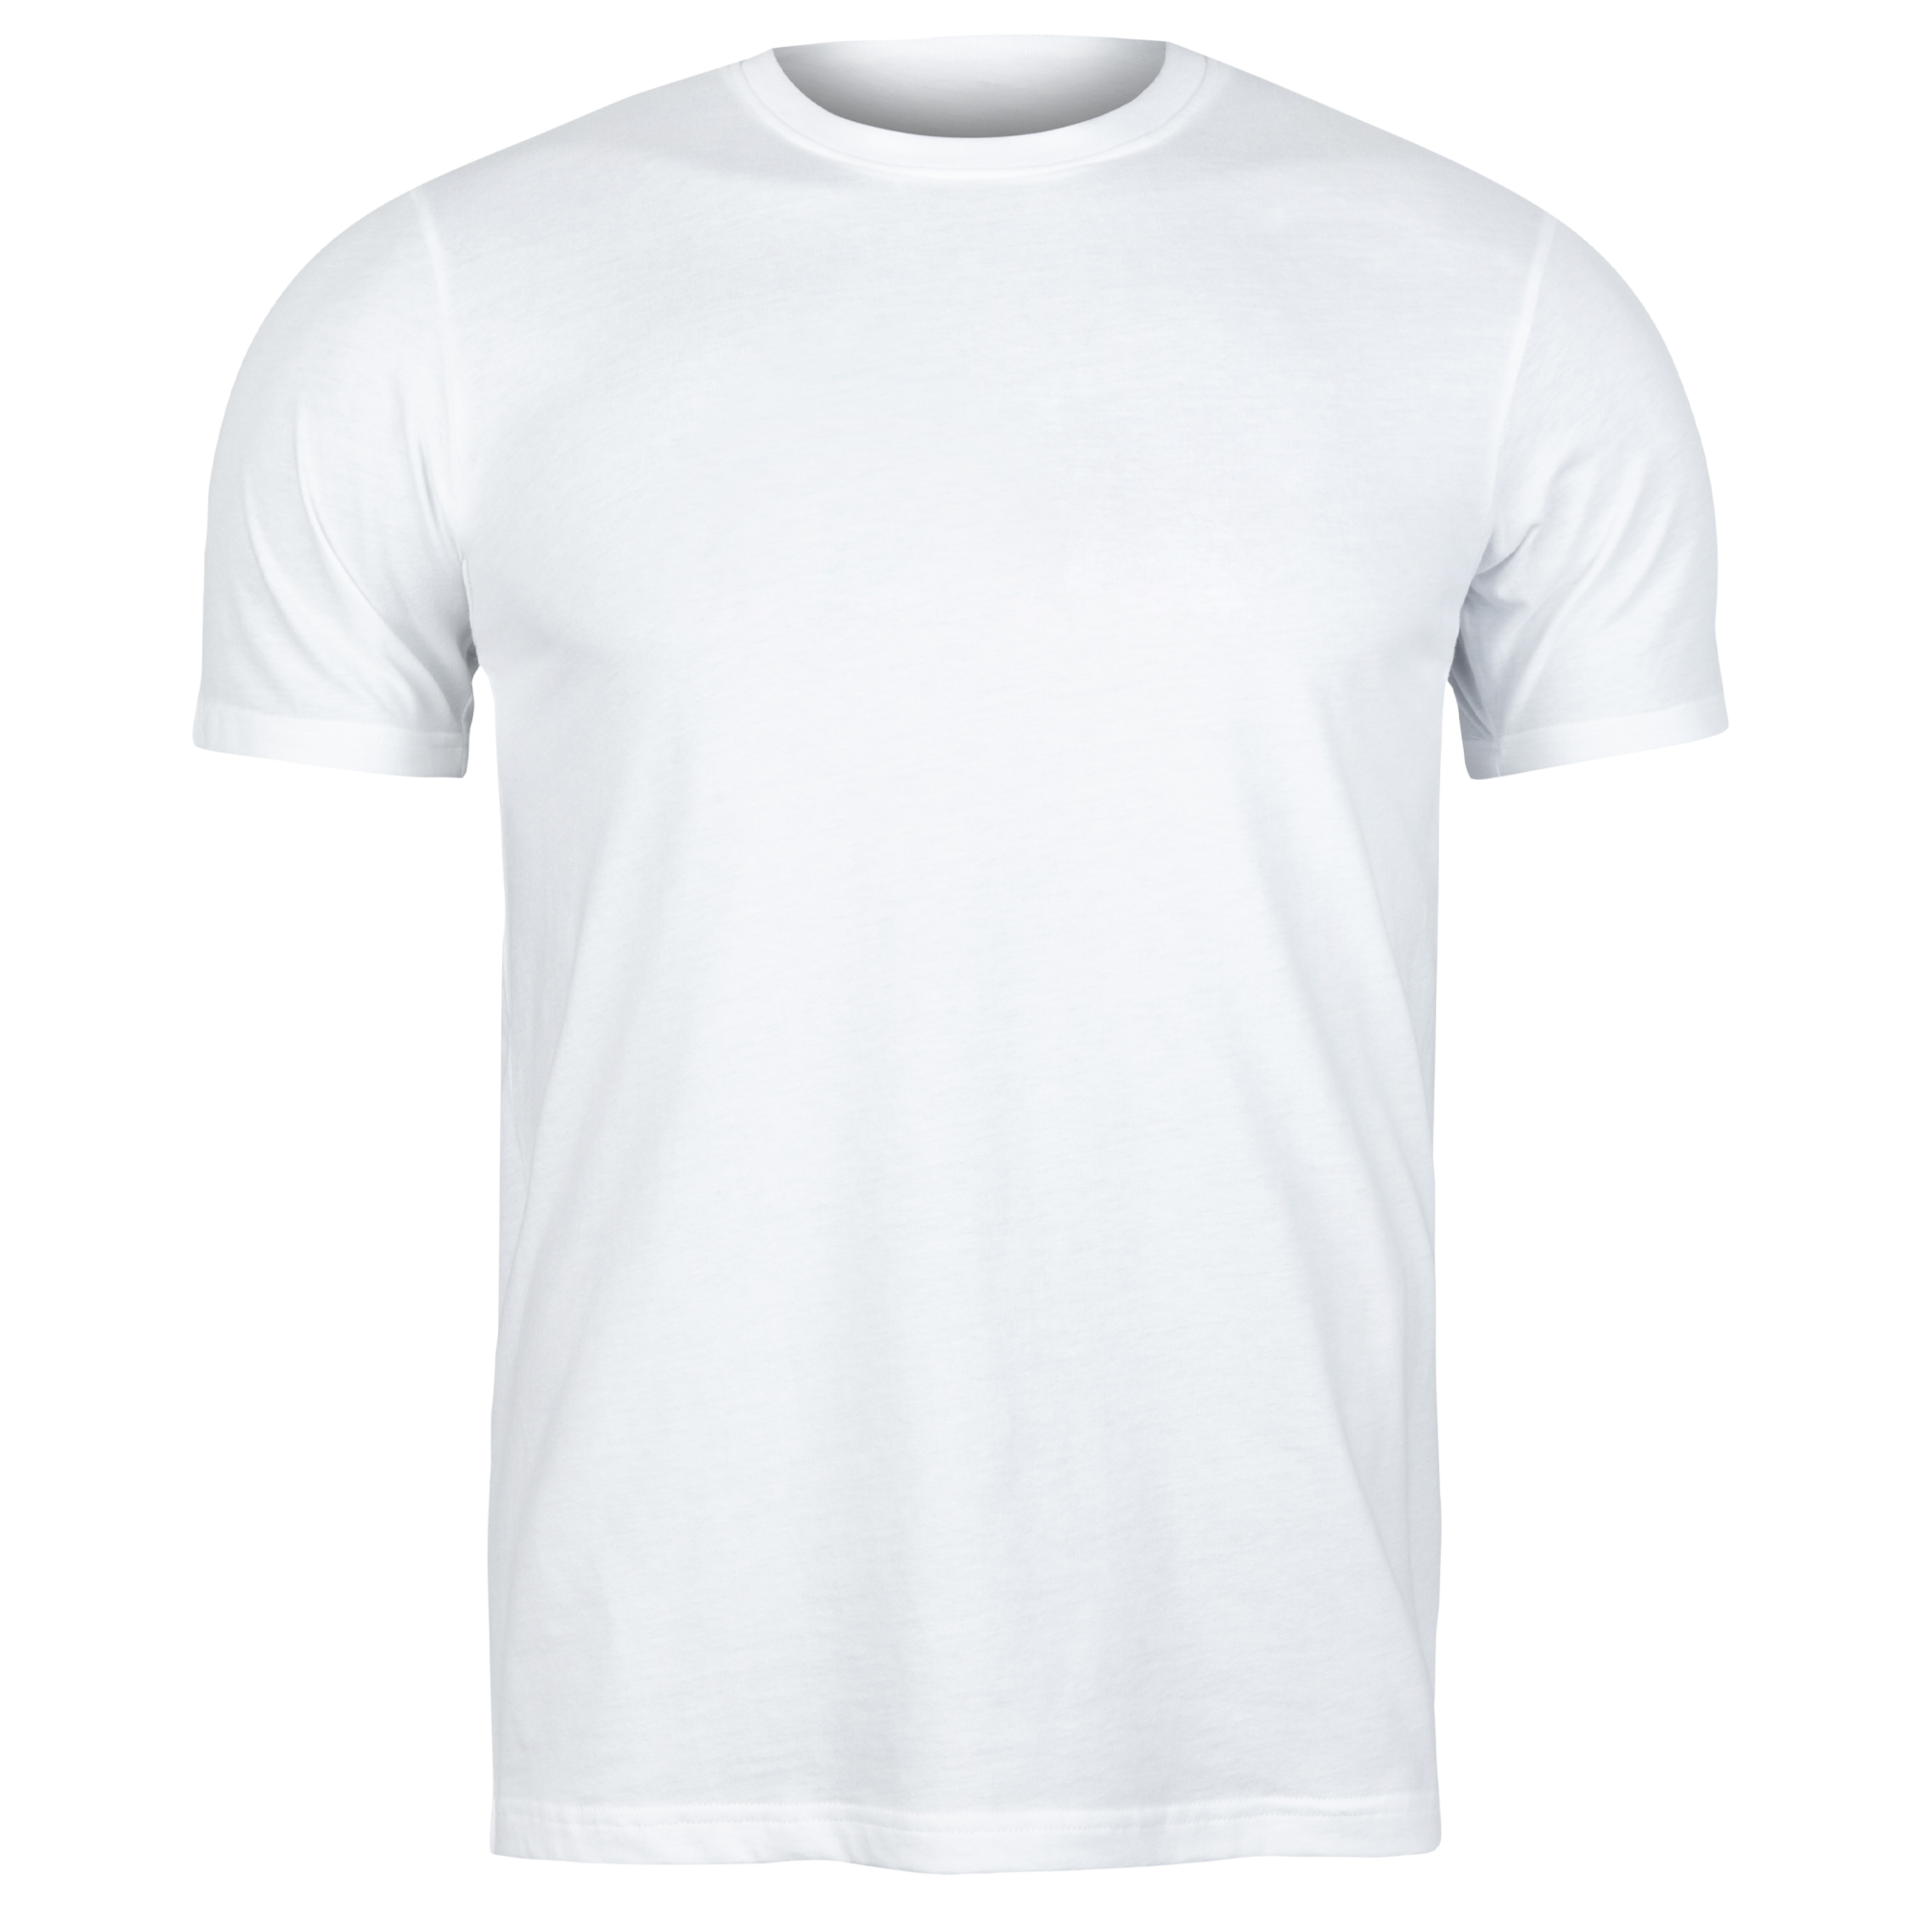 White T Shirt Png | peacecommission.kdsg.gov.ng